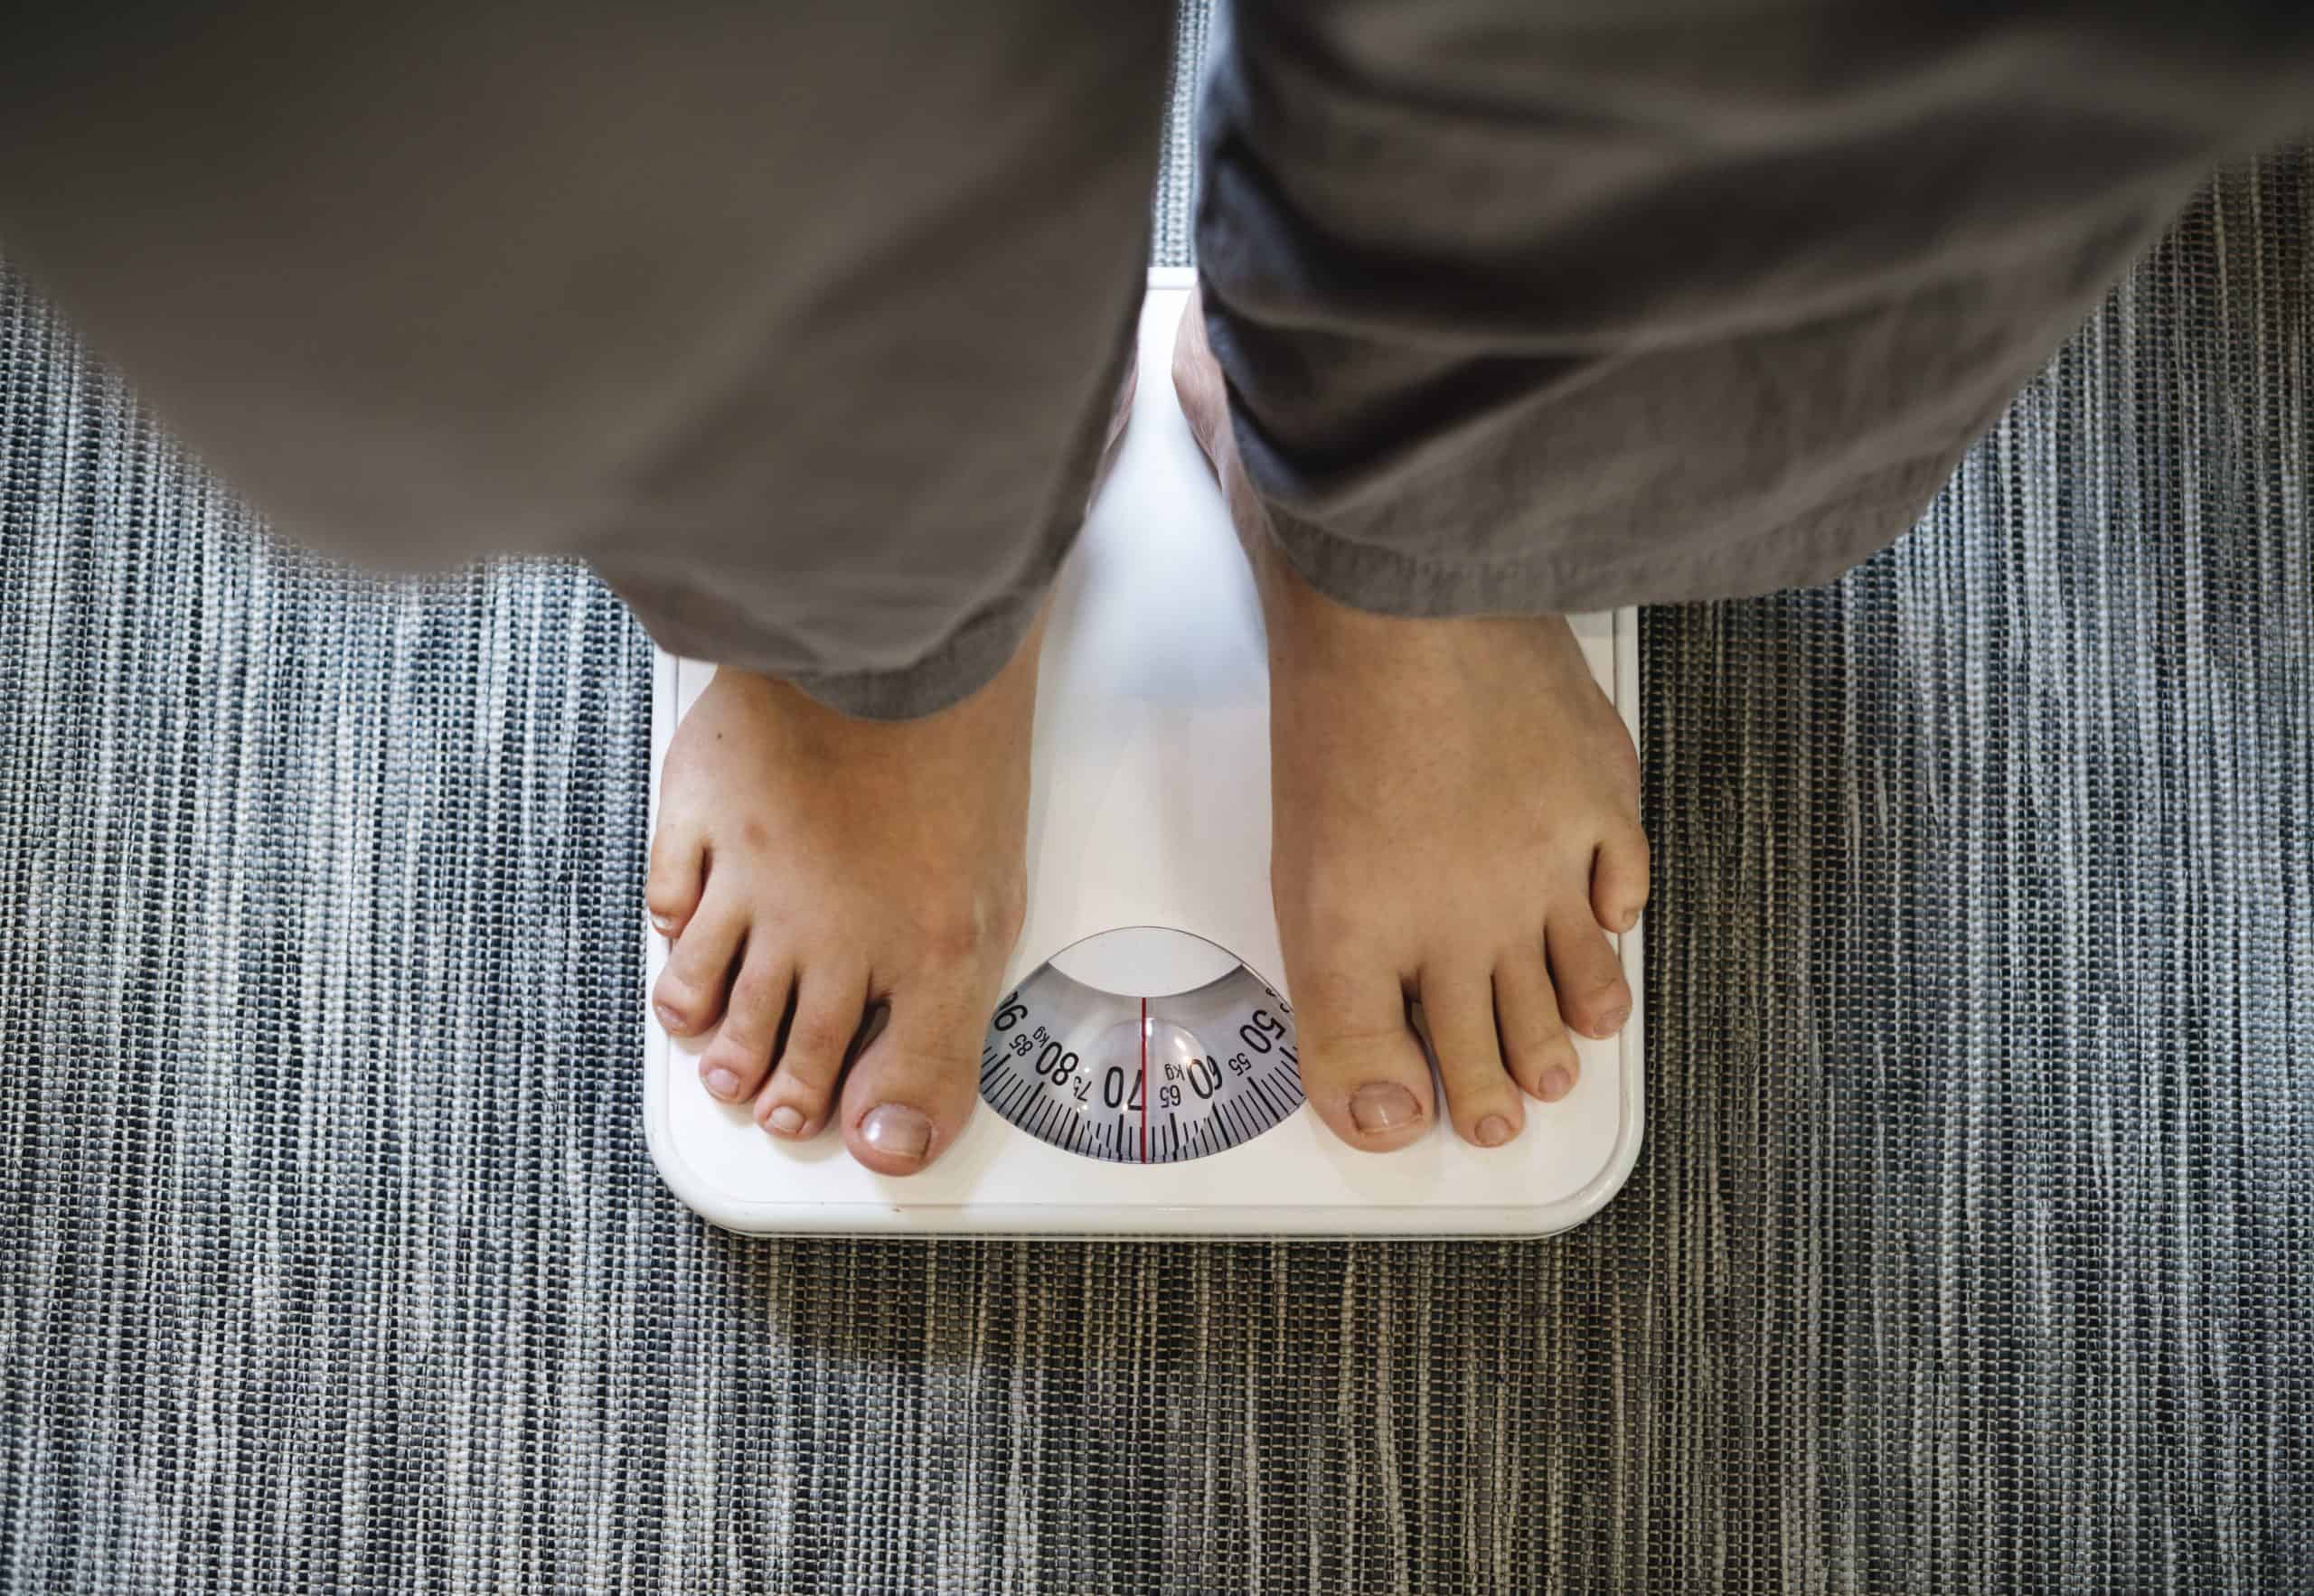 Weight gain can occur from PTSD